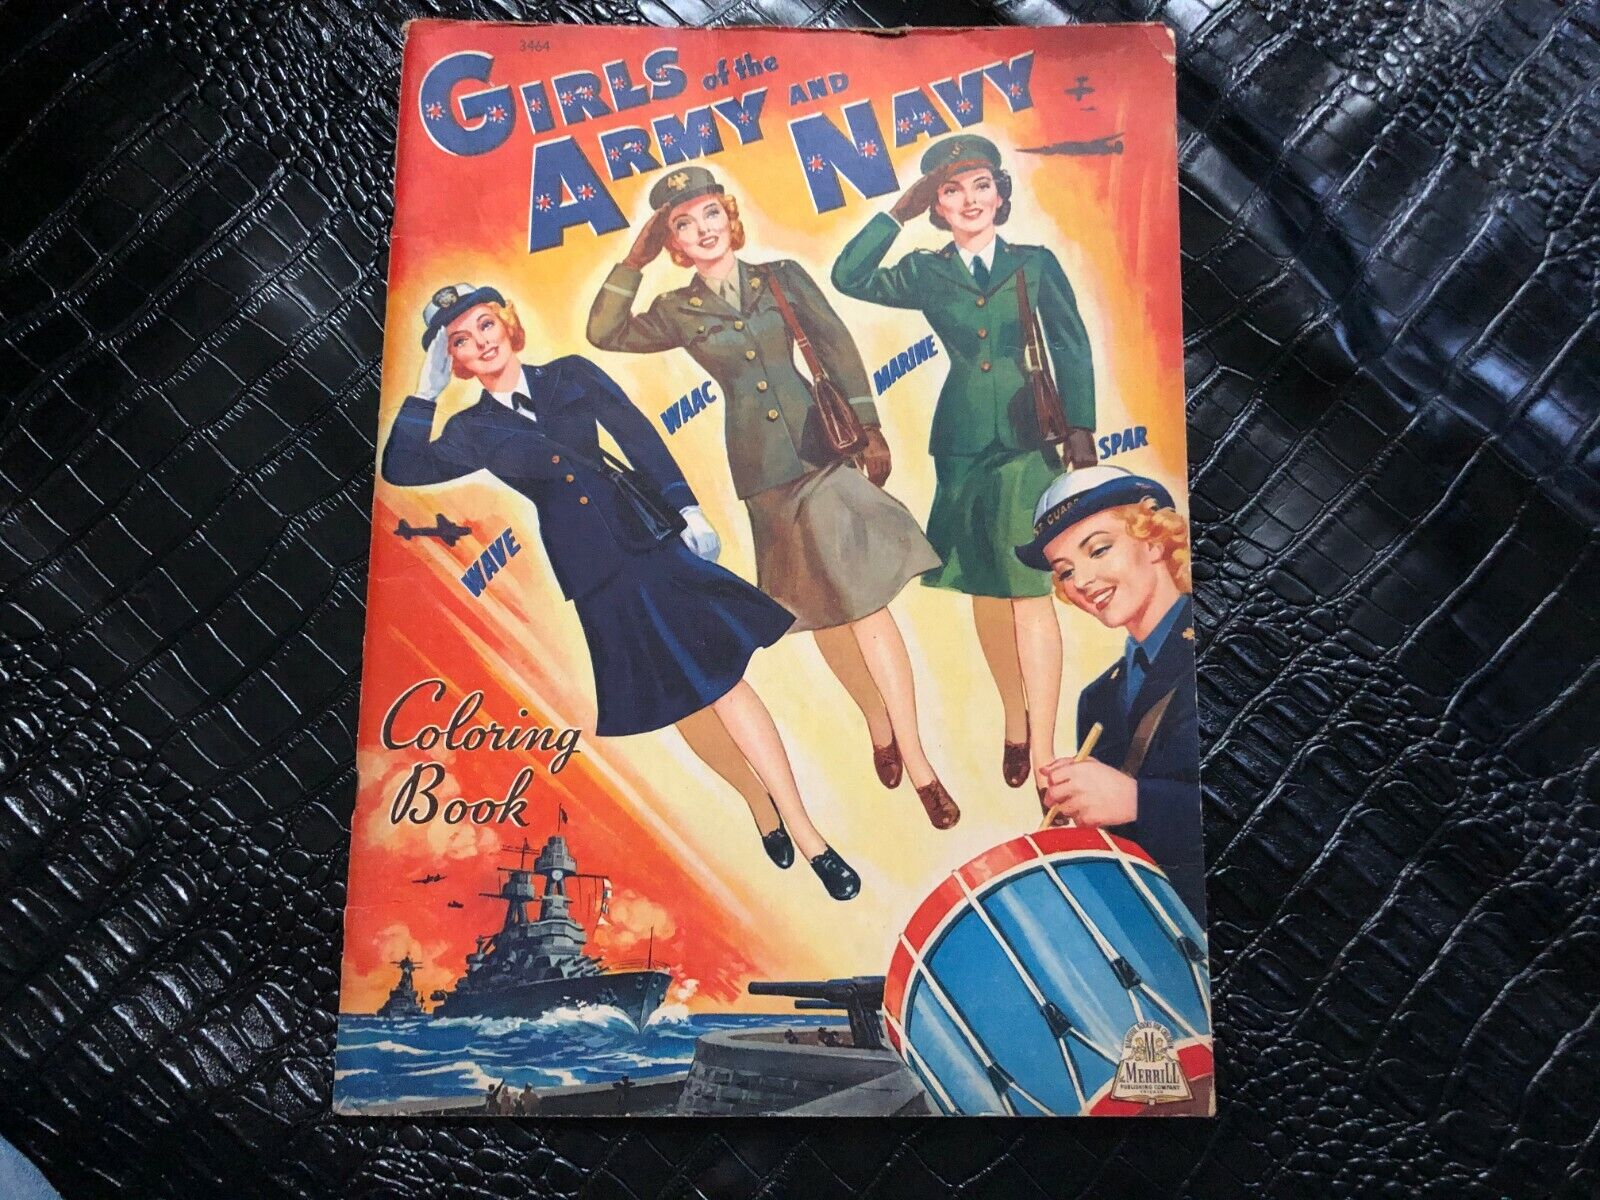 1943 WWII Vintage Coloring Book Girls of the Army and Navy -WAAC/WAVE/SPAR women